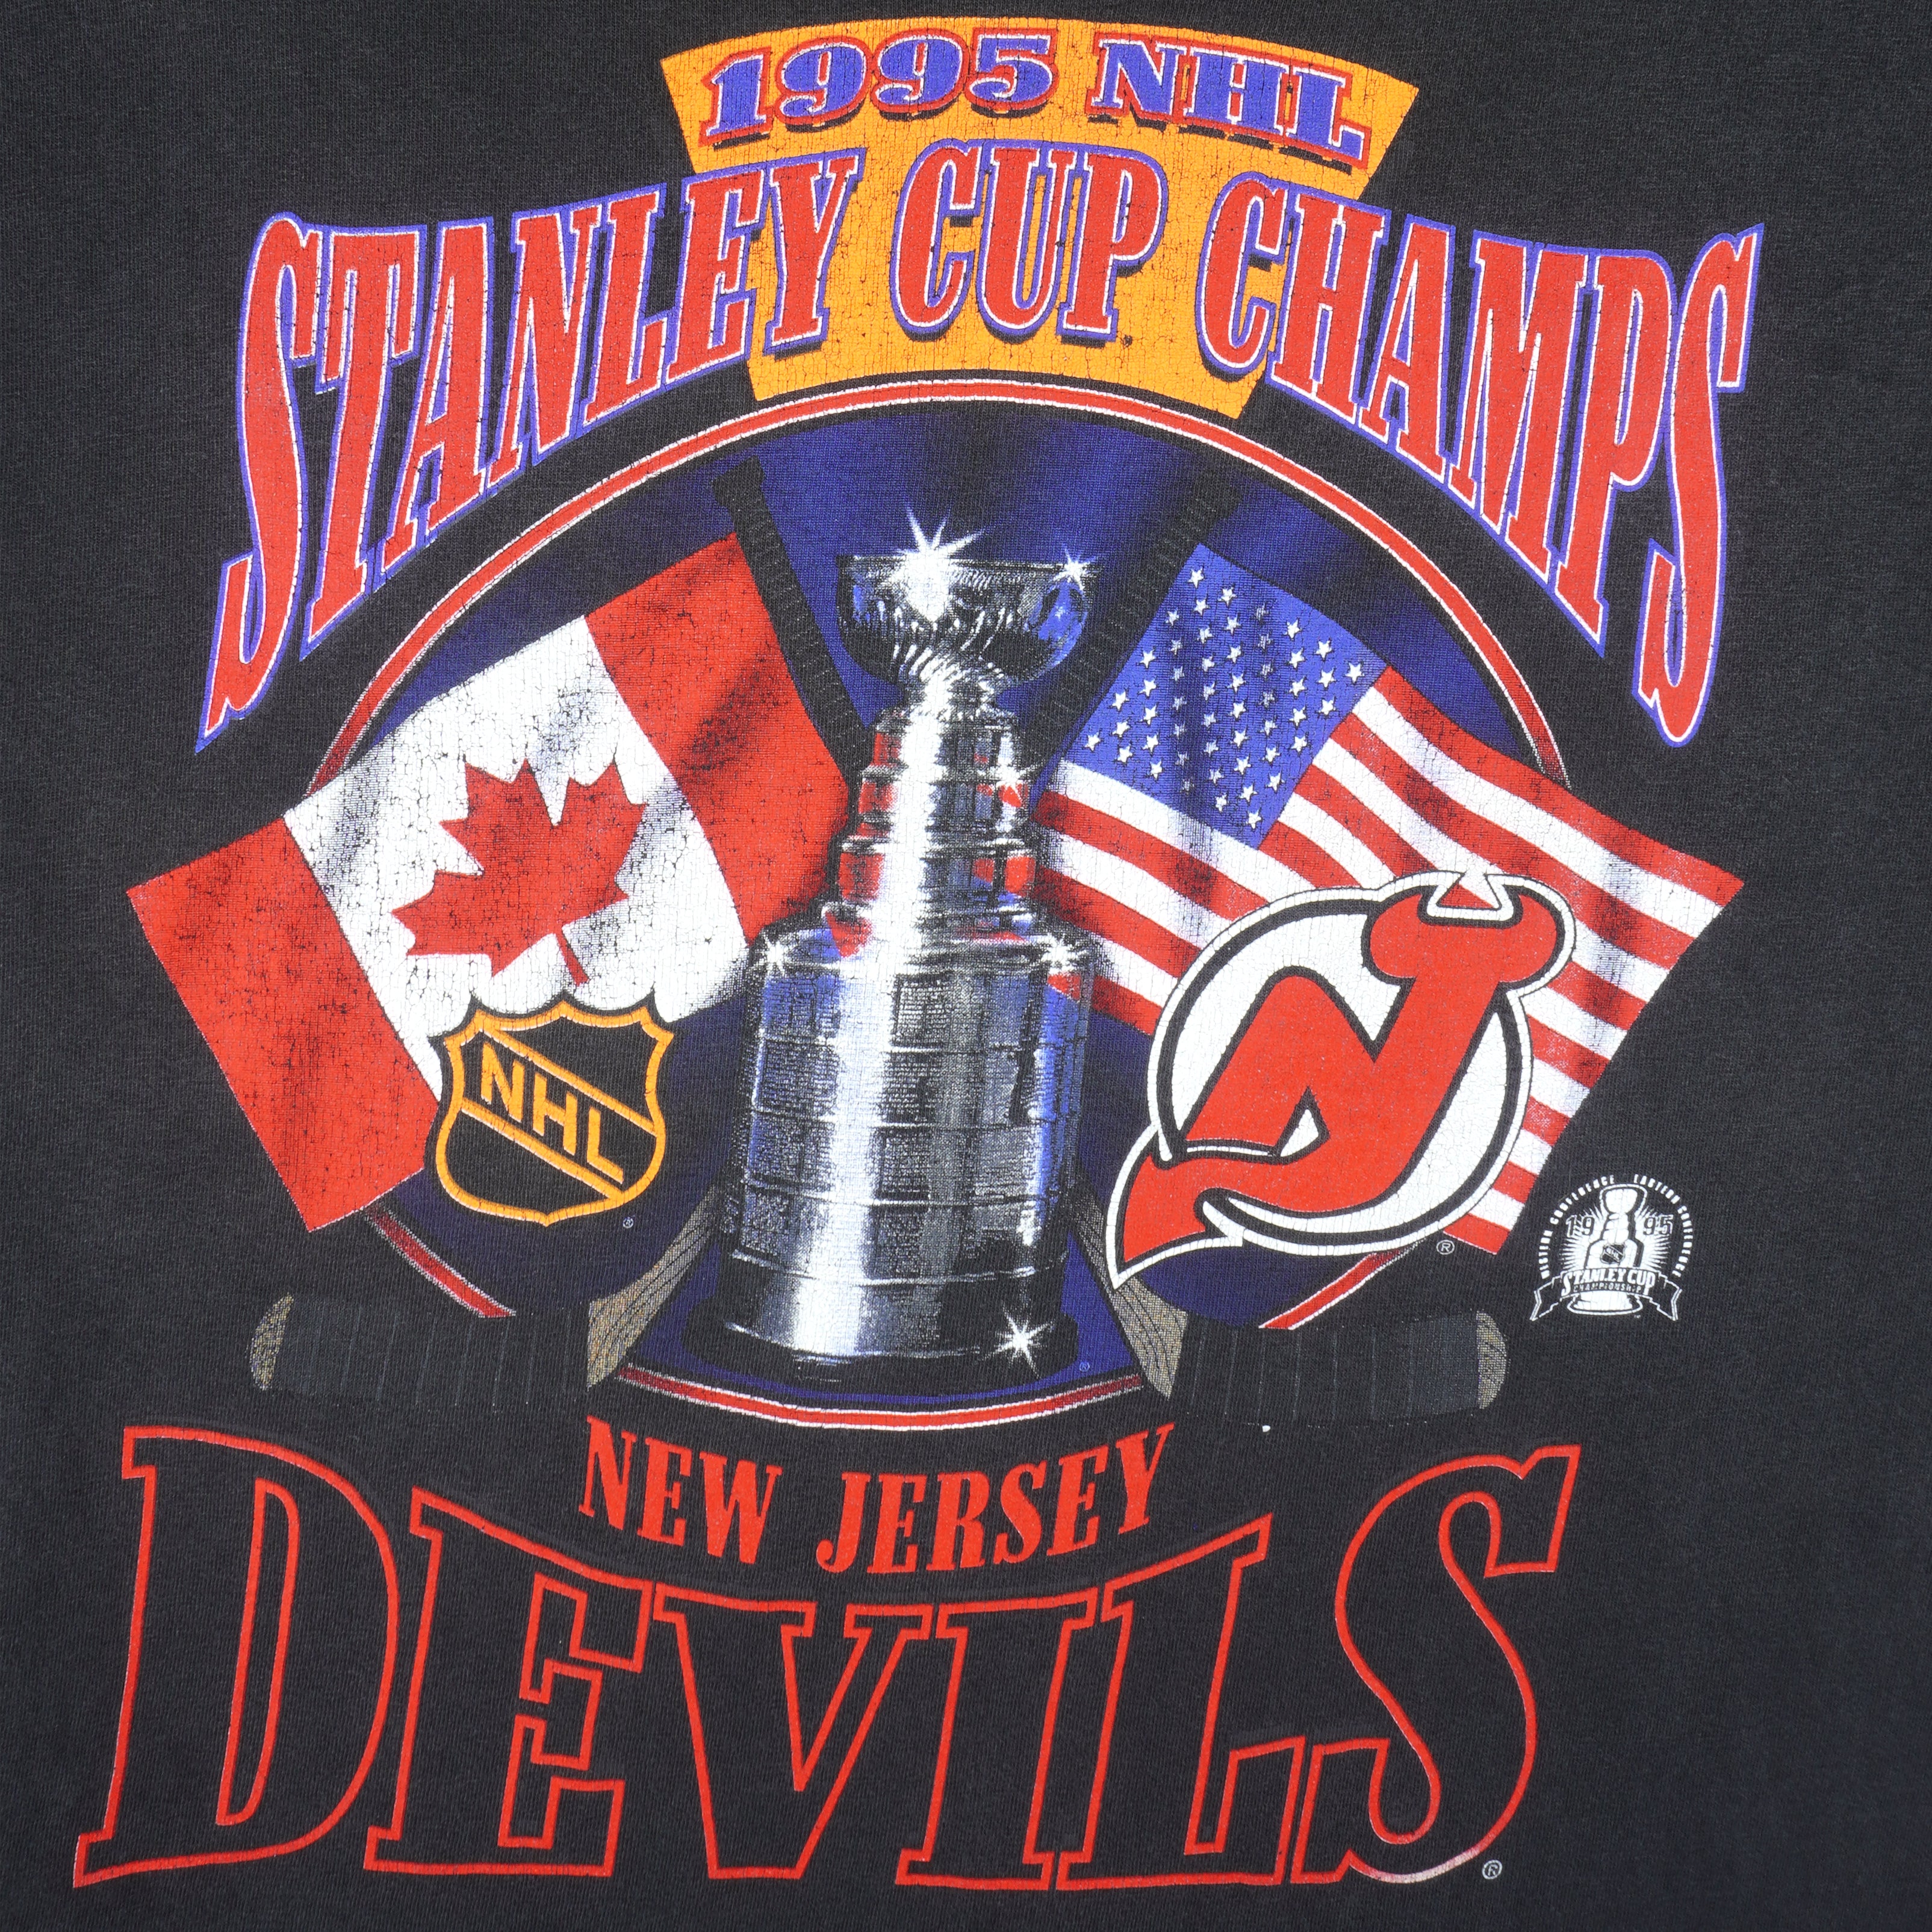 New Jersey Devils - Stanley Cup Champions 1995